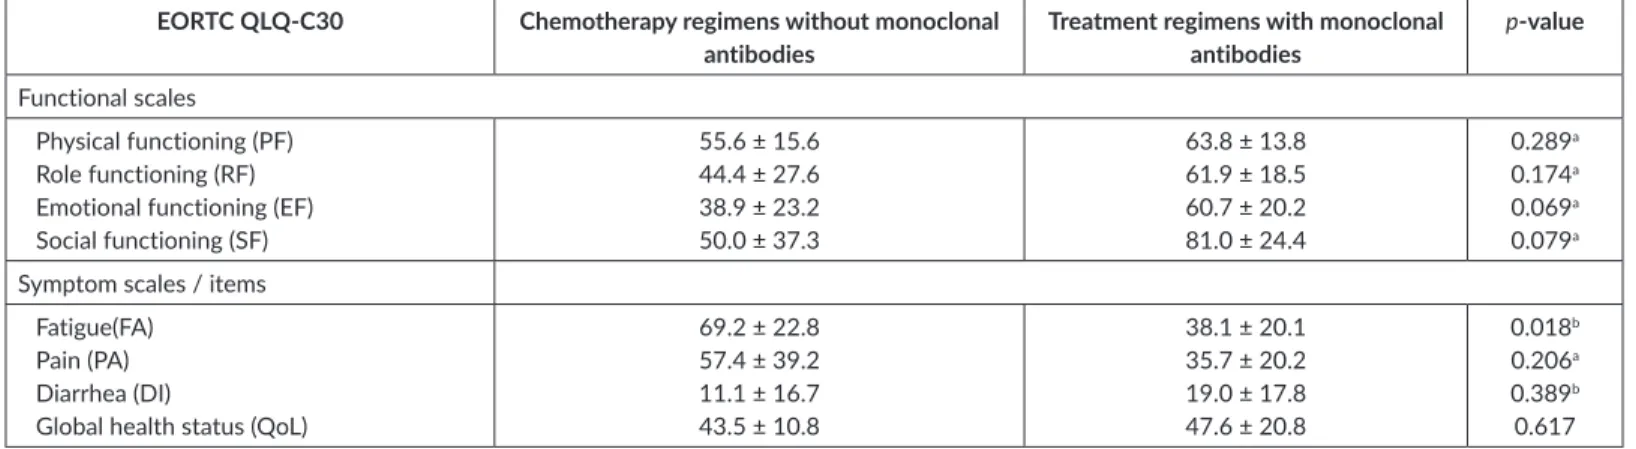 Table 7. Mean ± standard deviation of EORTC subscales QLQ-BR23 for the group of patients treated with chemothera- chemothera-py regimens without monoclonal antibodies and patients treated with treatment regimens with monoclonal antibodies  and p-values, bo